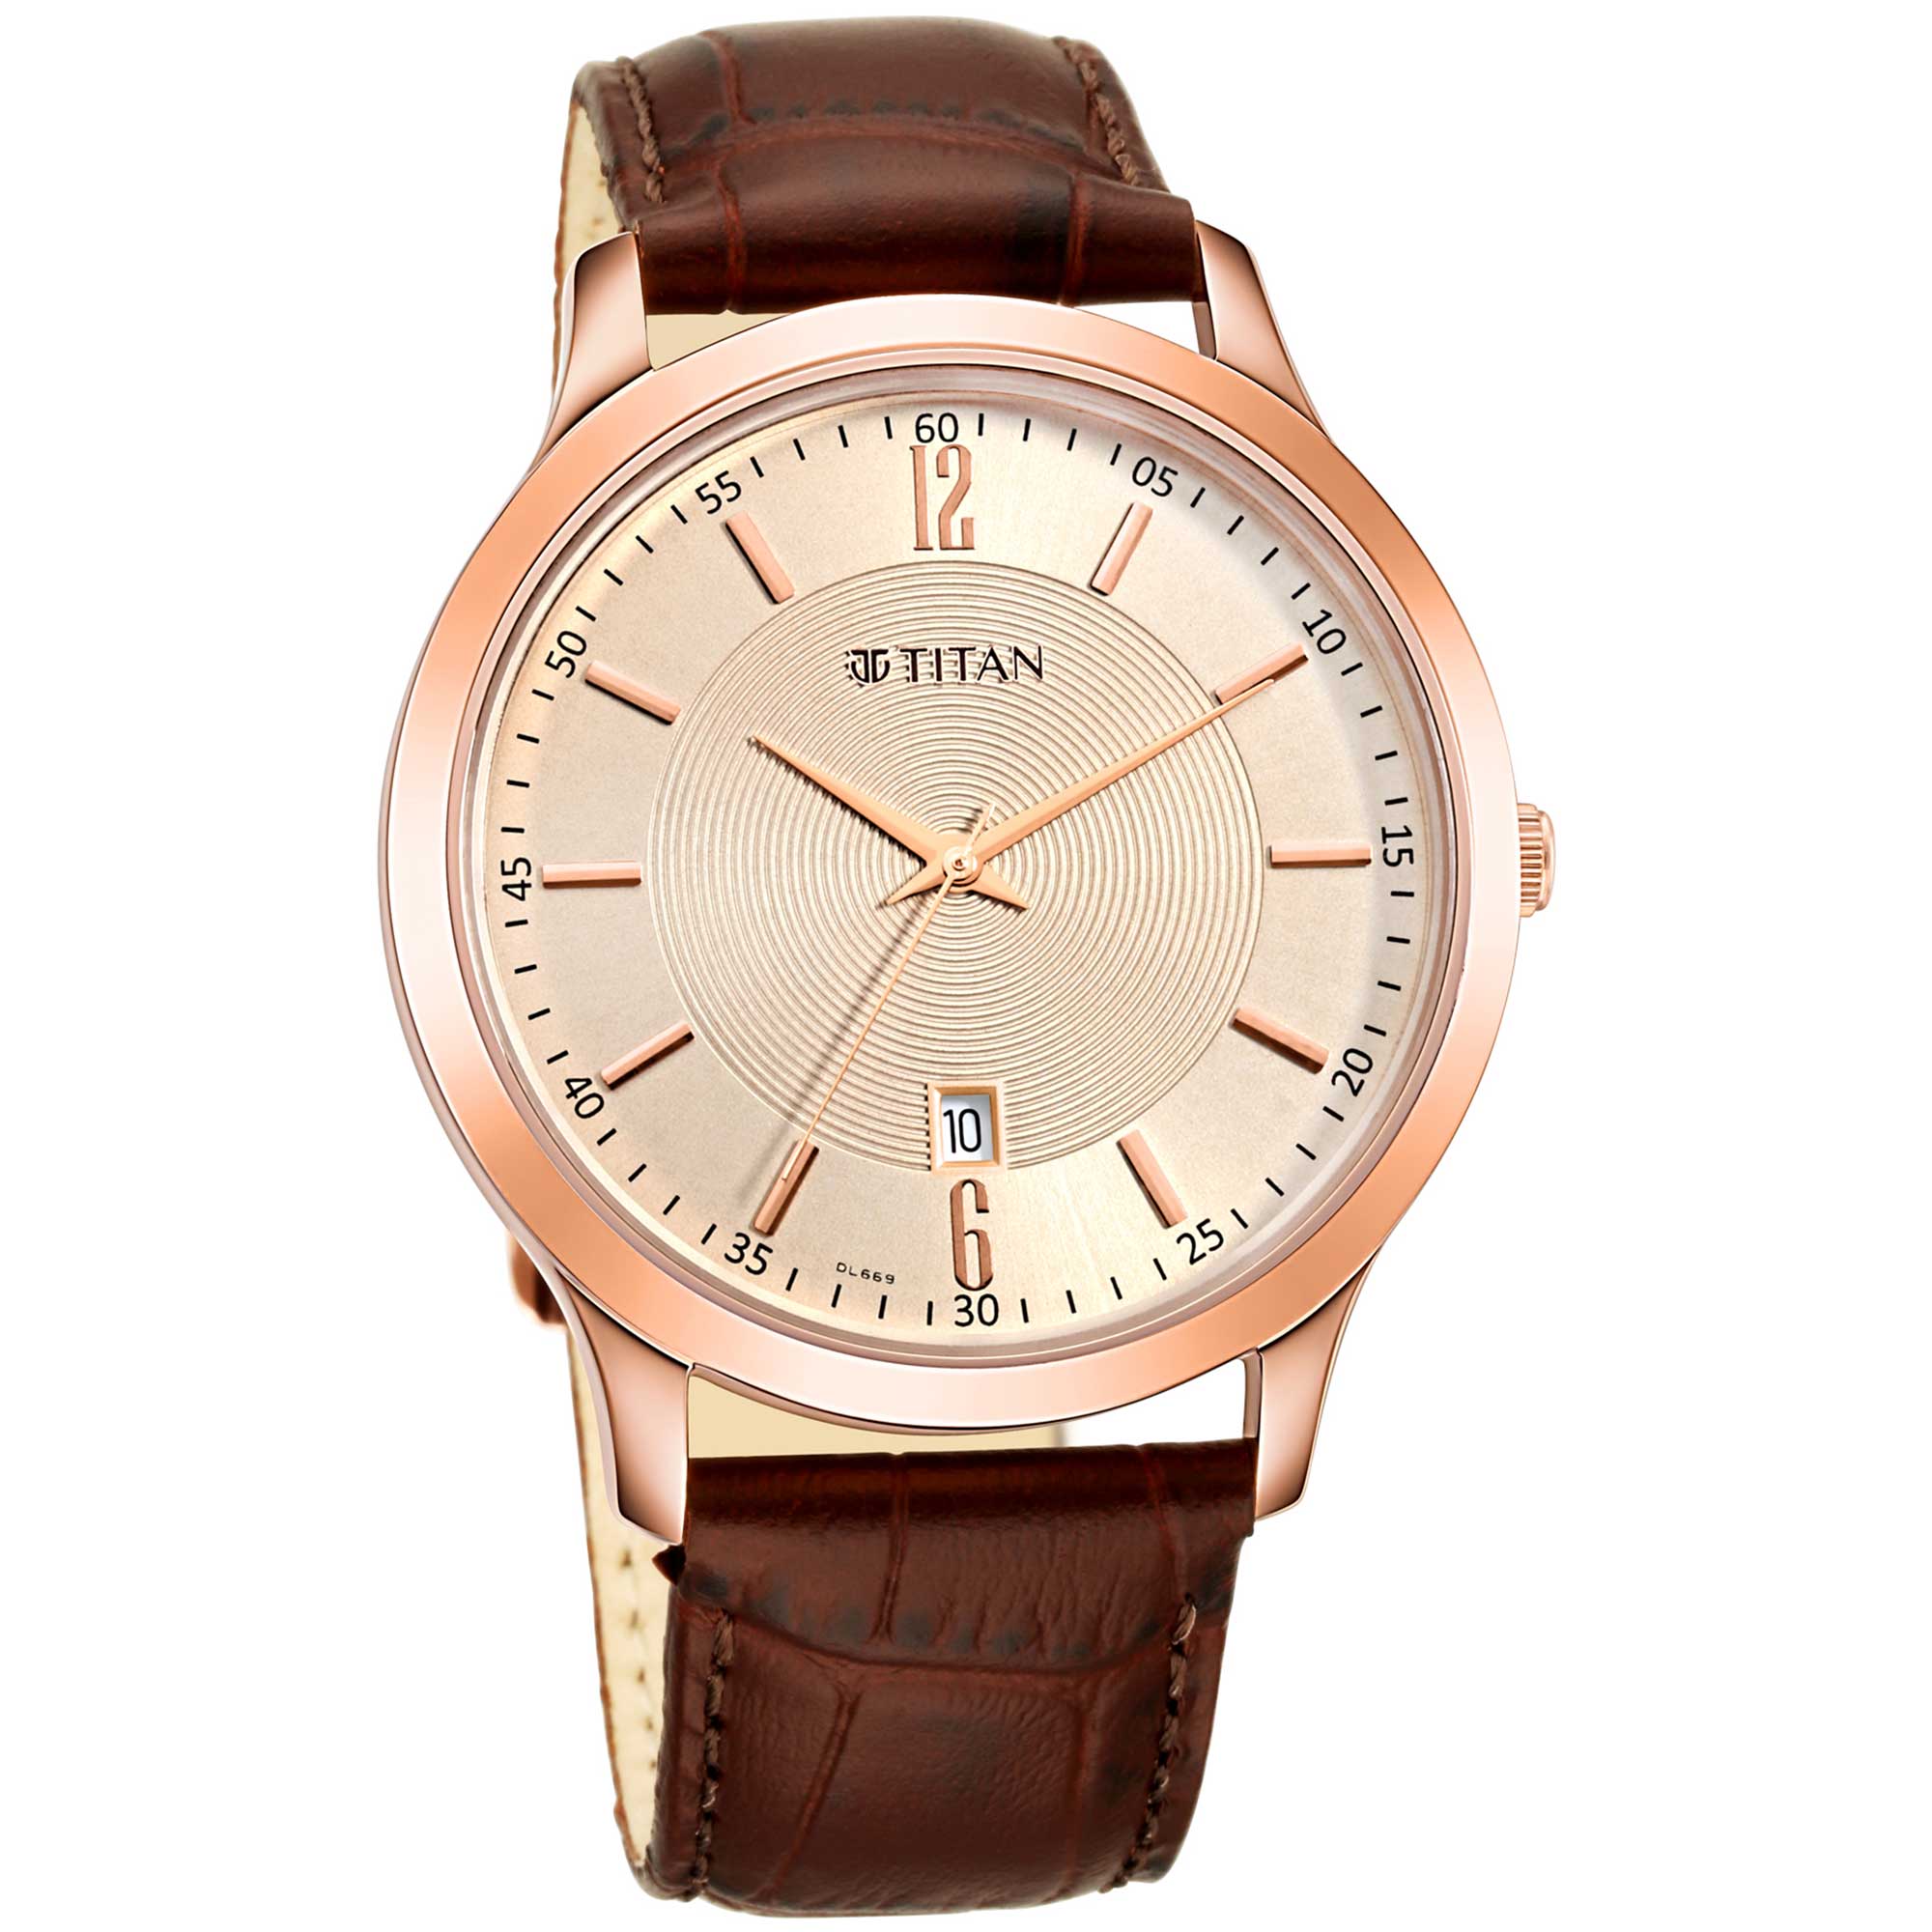 Titan Rose Gold Dial Analog with Date Leather Strap watch for Men